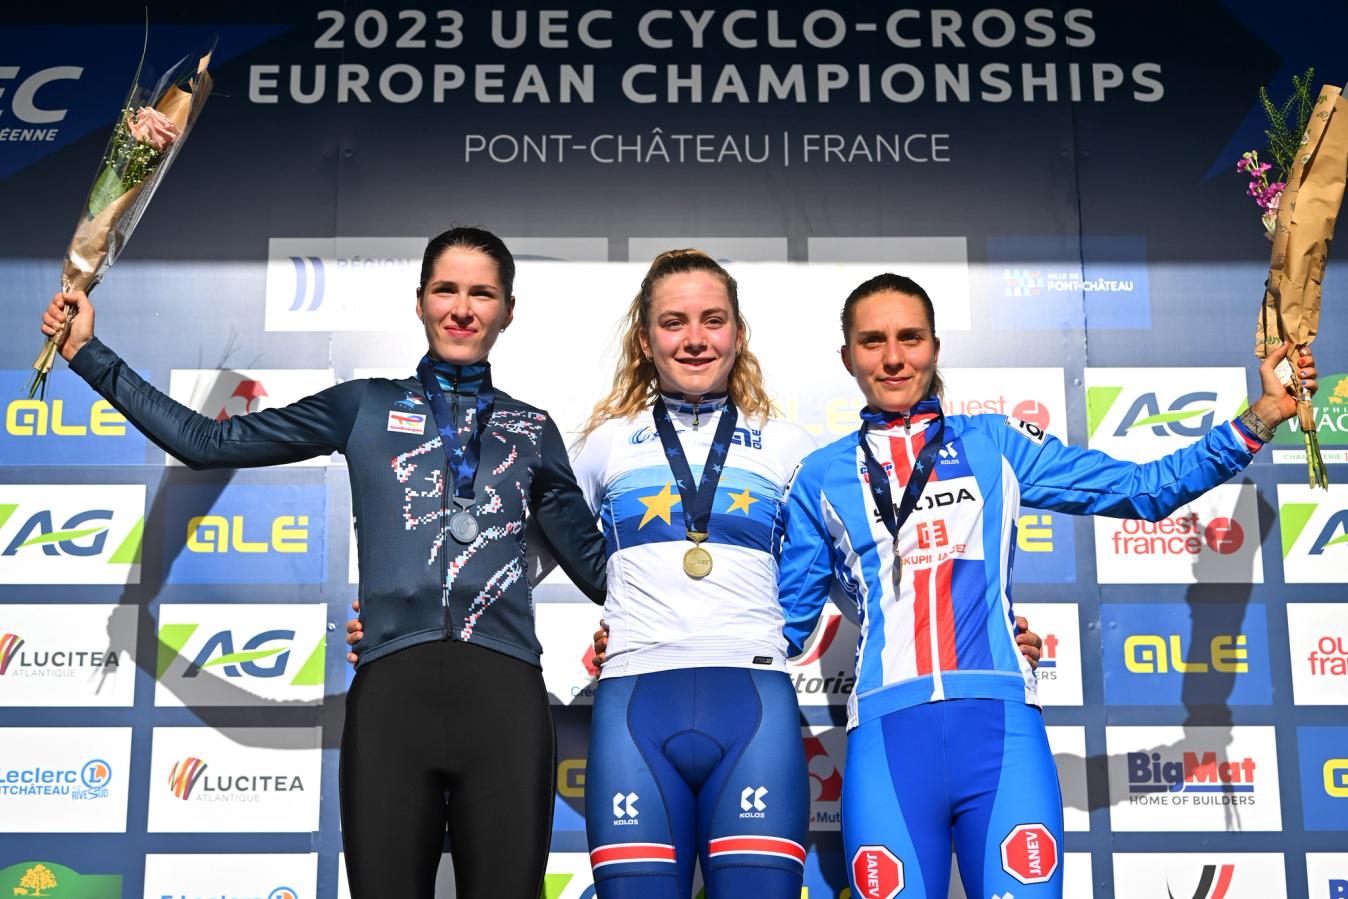 Schreiber finished second behind former teammate Zoe Bäckstedt in the U23 race at European Championships